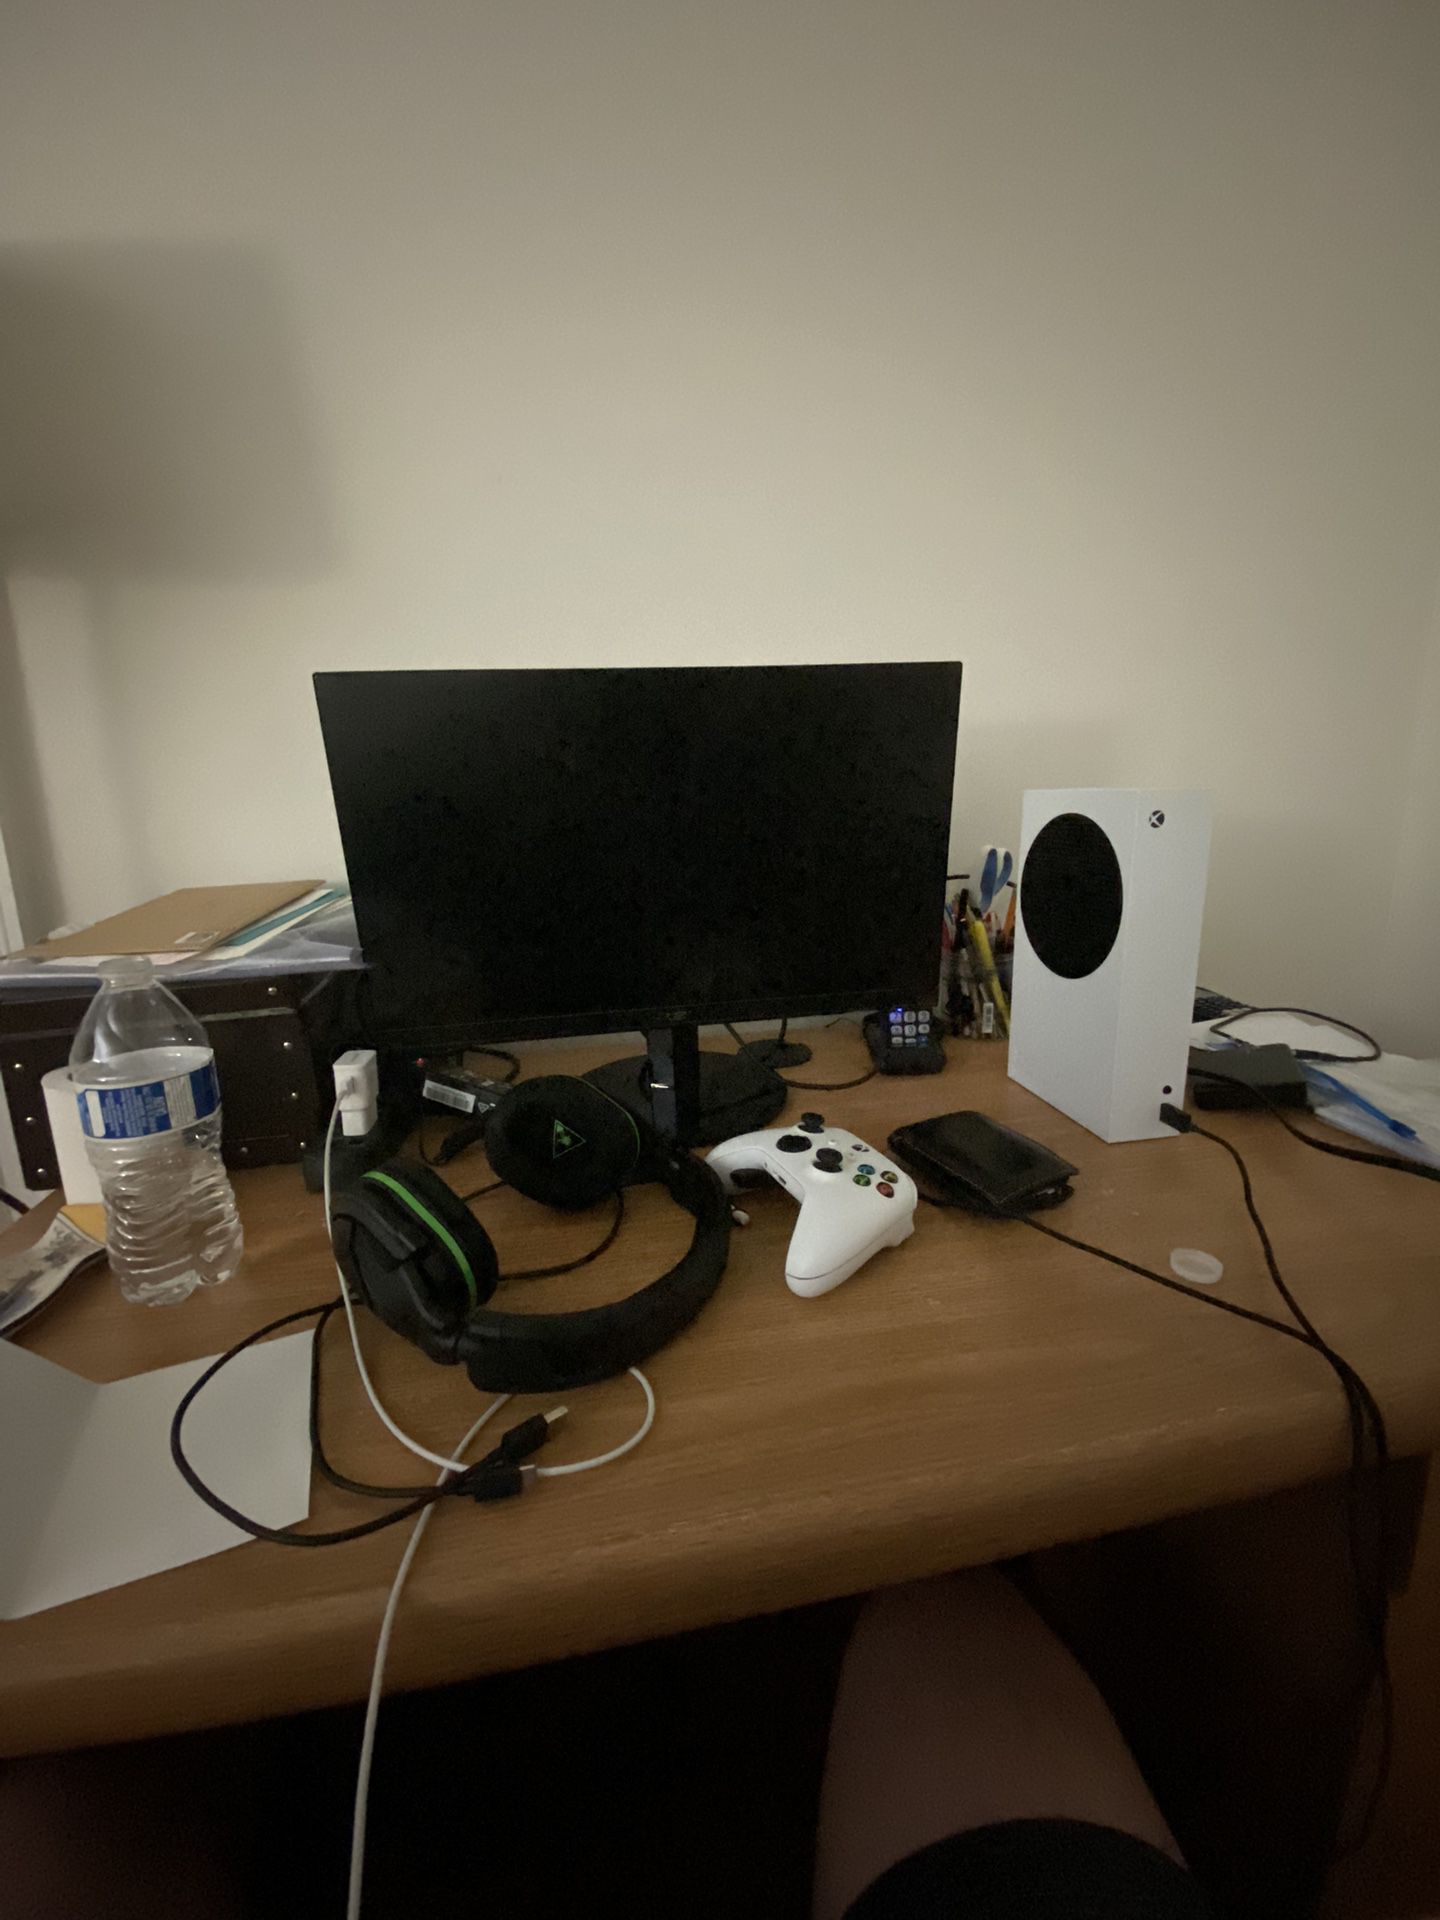 Xbox Series S + Acer Gaming Monitor +Turtle beach Headset+Wired Controller W/Strikepack+Possibly Elite controller